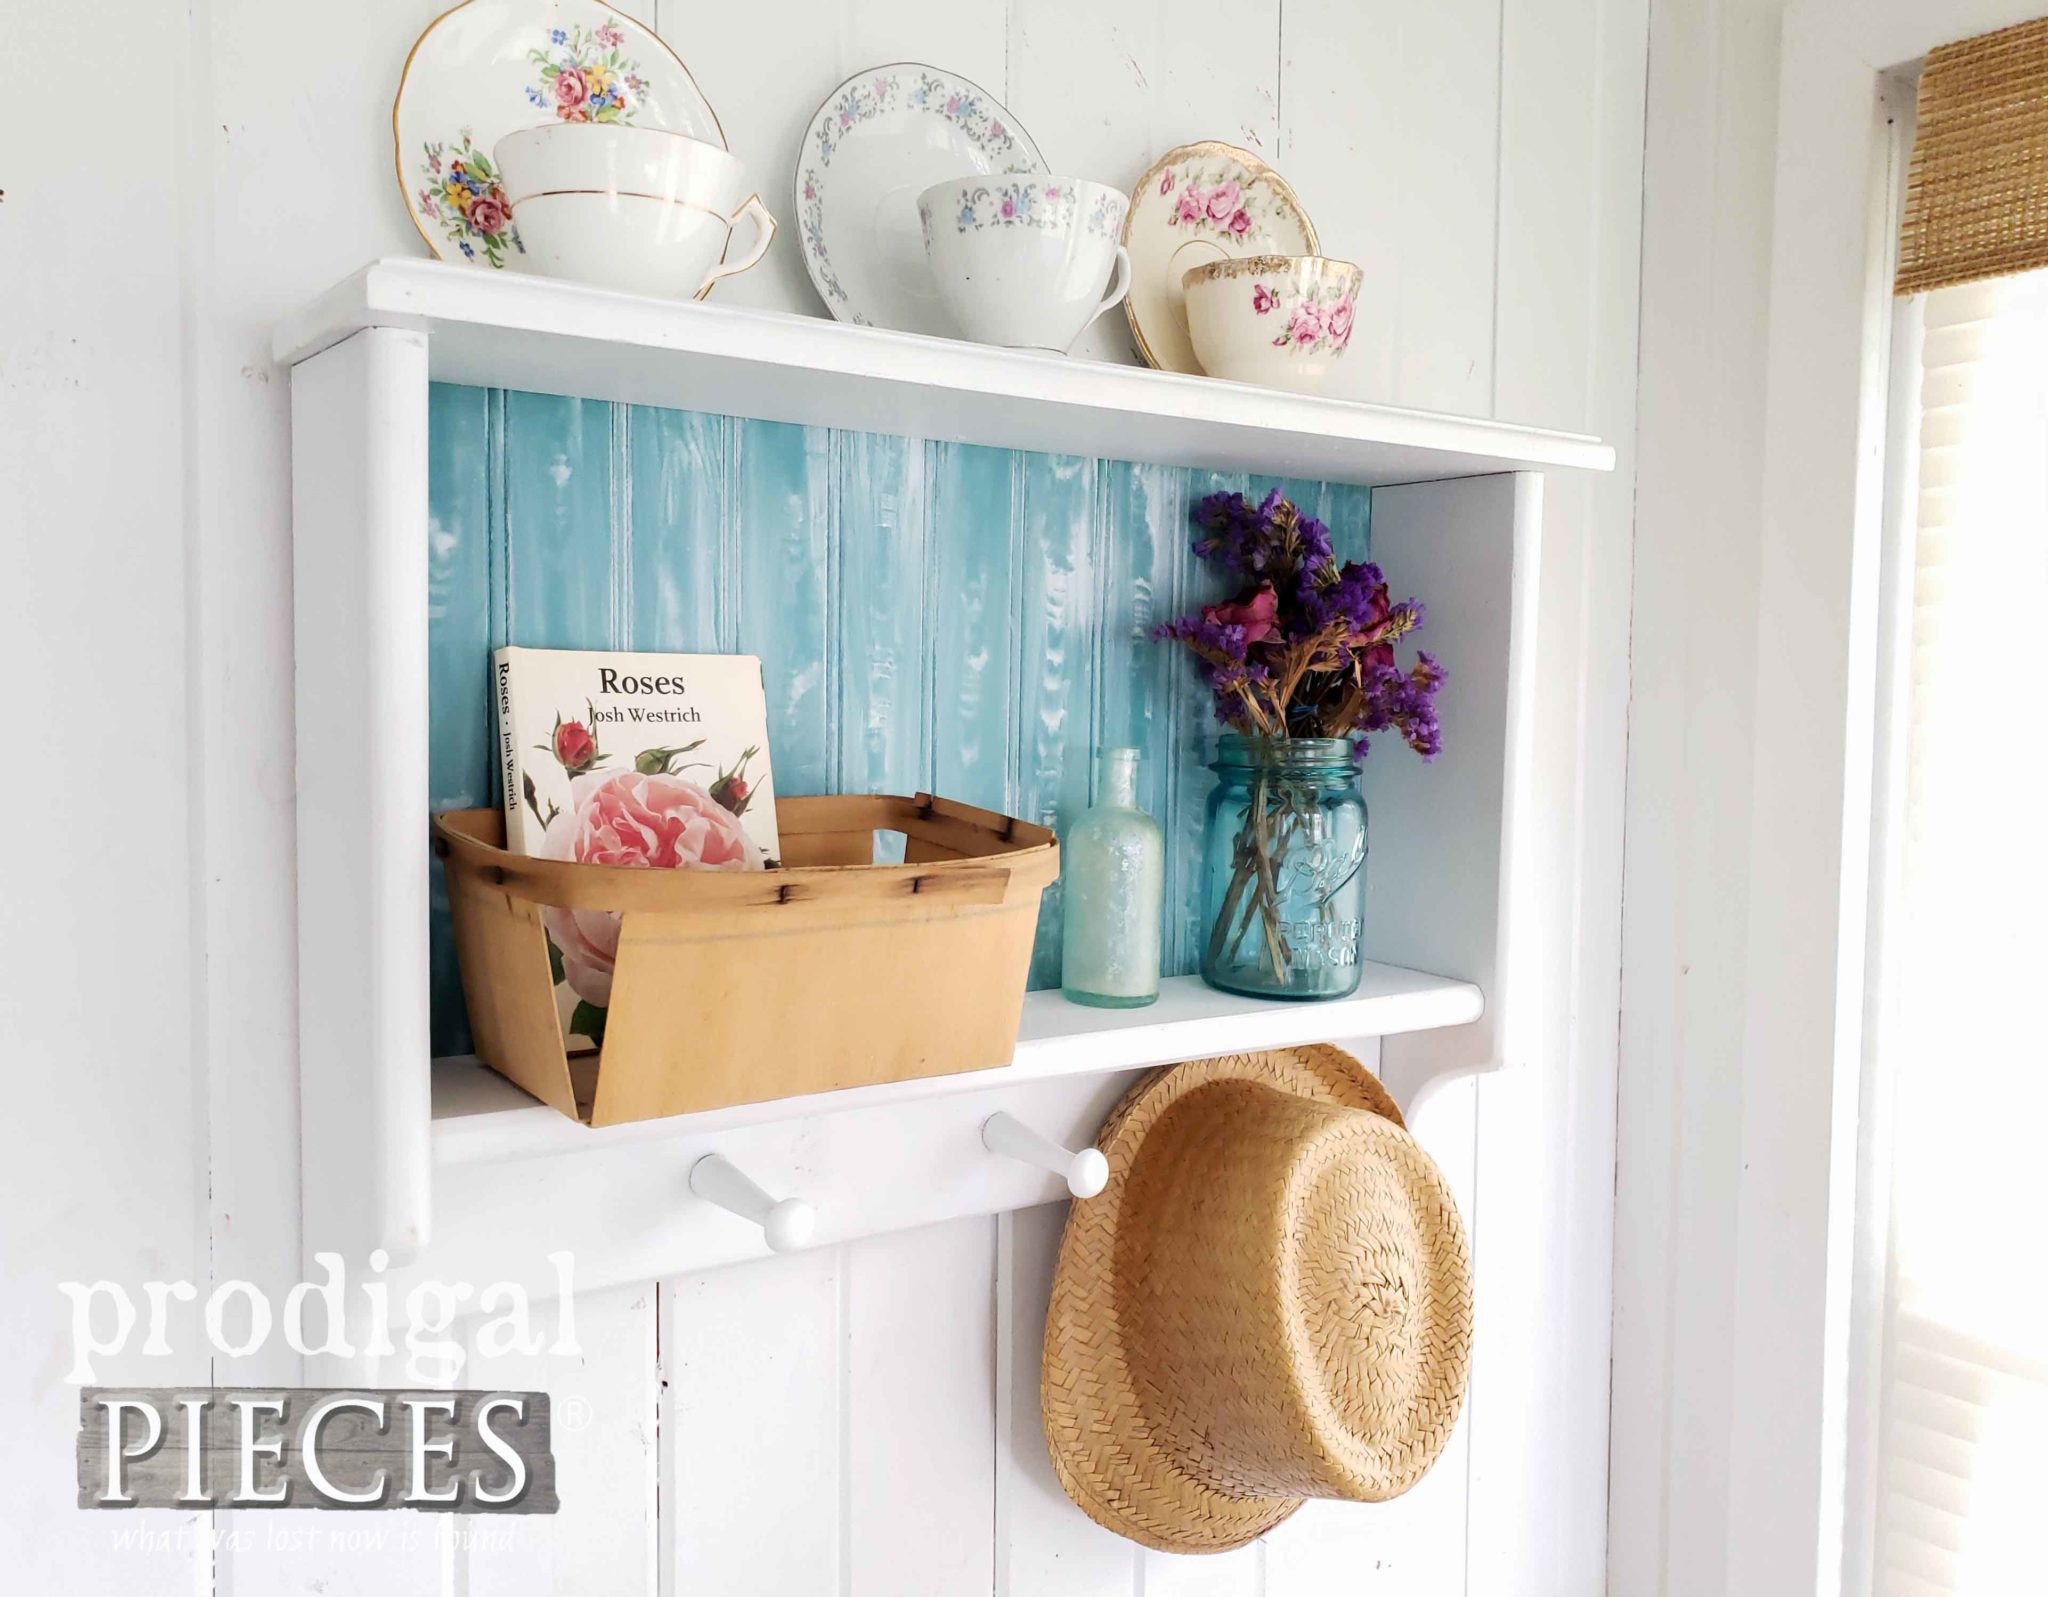 Beach Style Towel Coat Rack for your Home Decor by Larissa of Prodigal Pieces | prodigalpieces.com #prodigalpieces #diy #handmade #home #homedecor #beach 